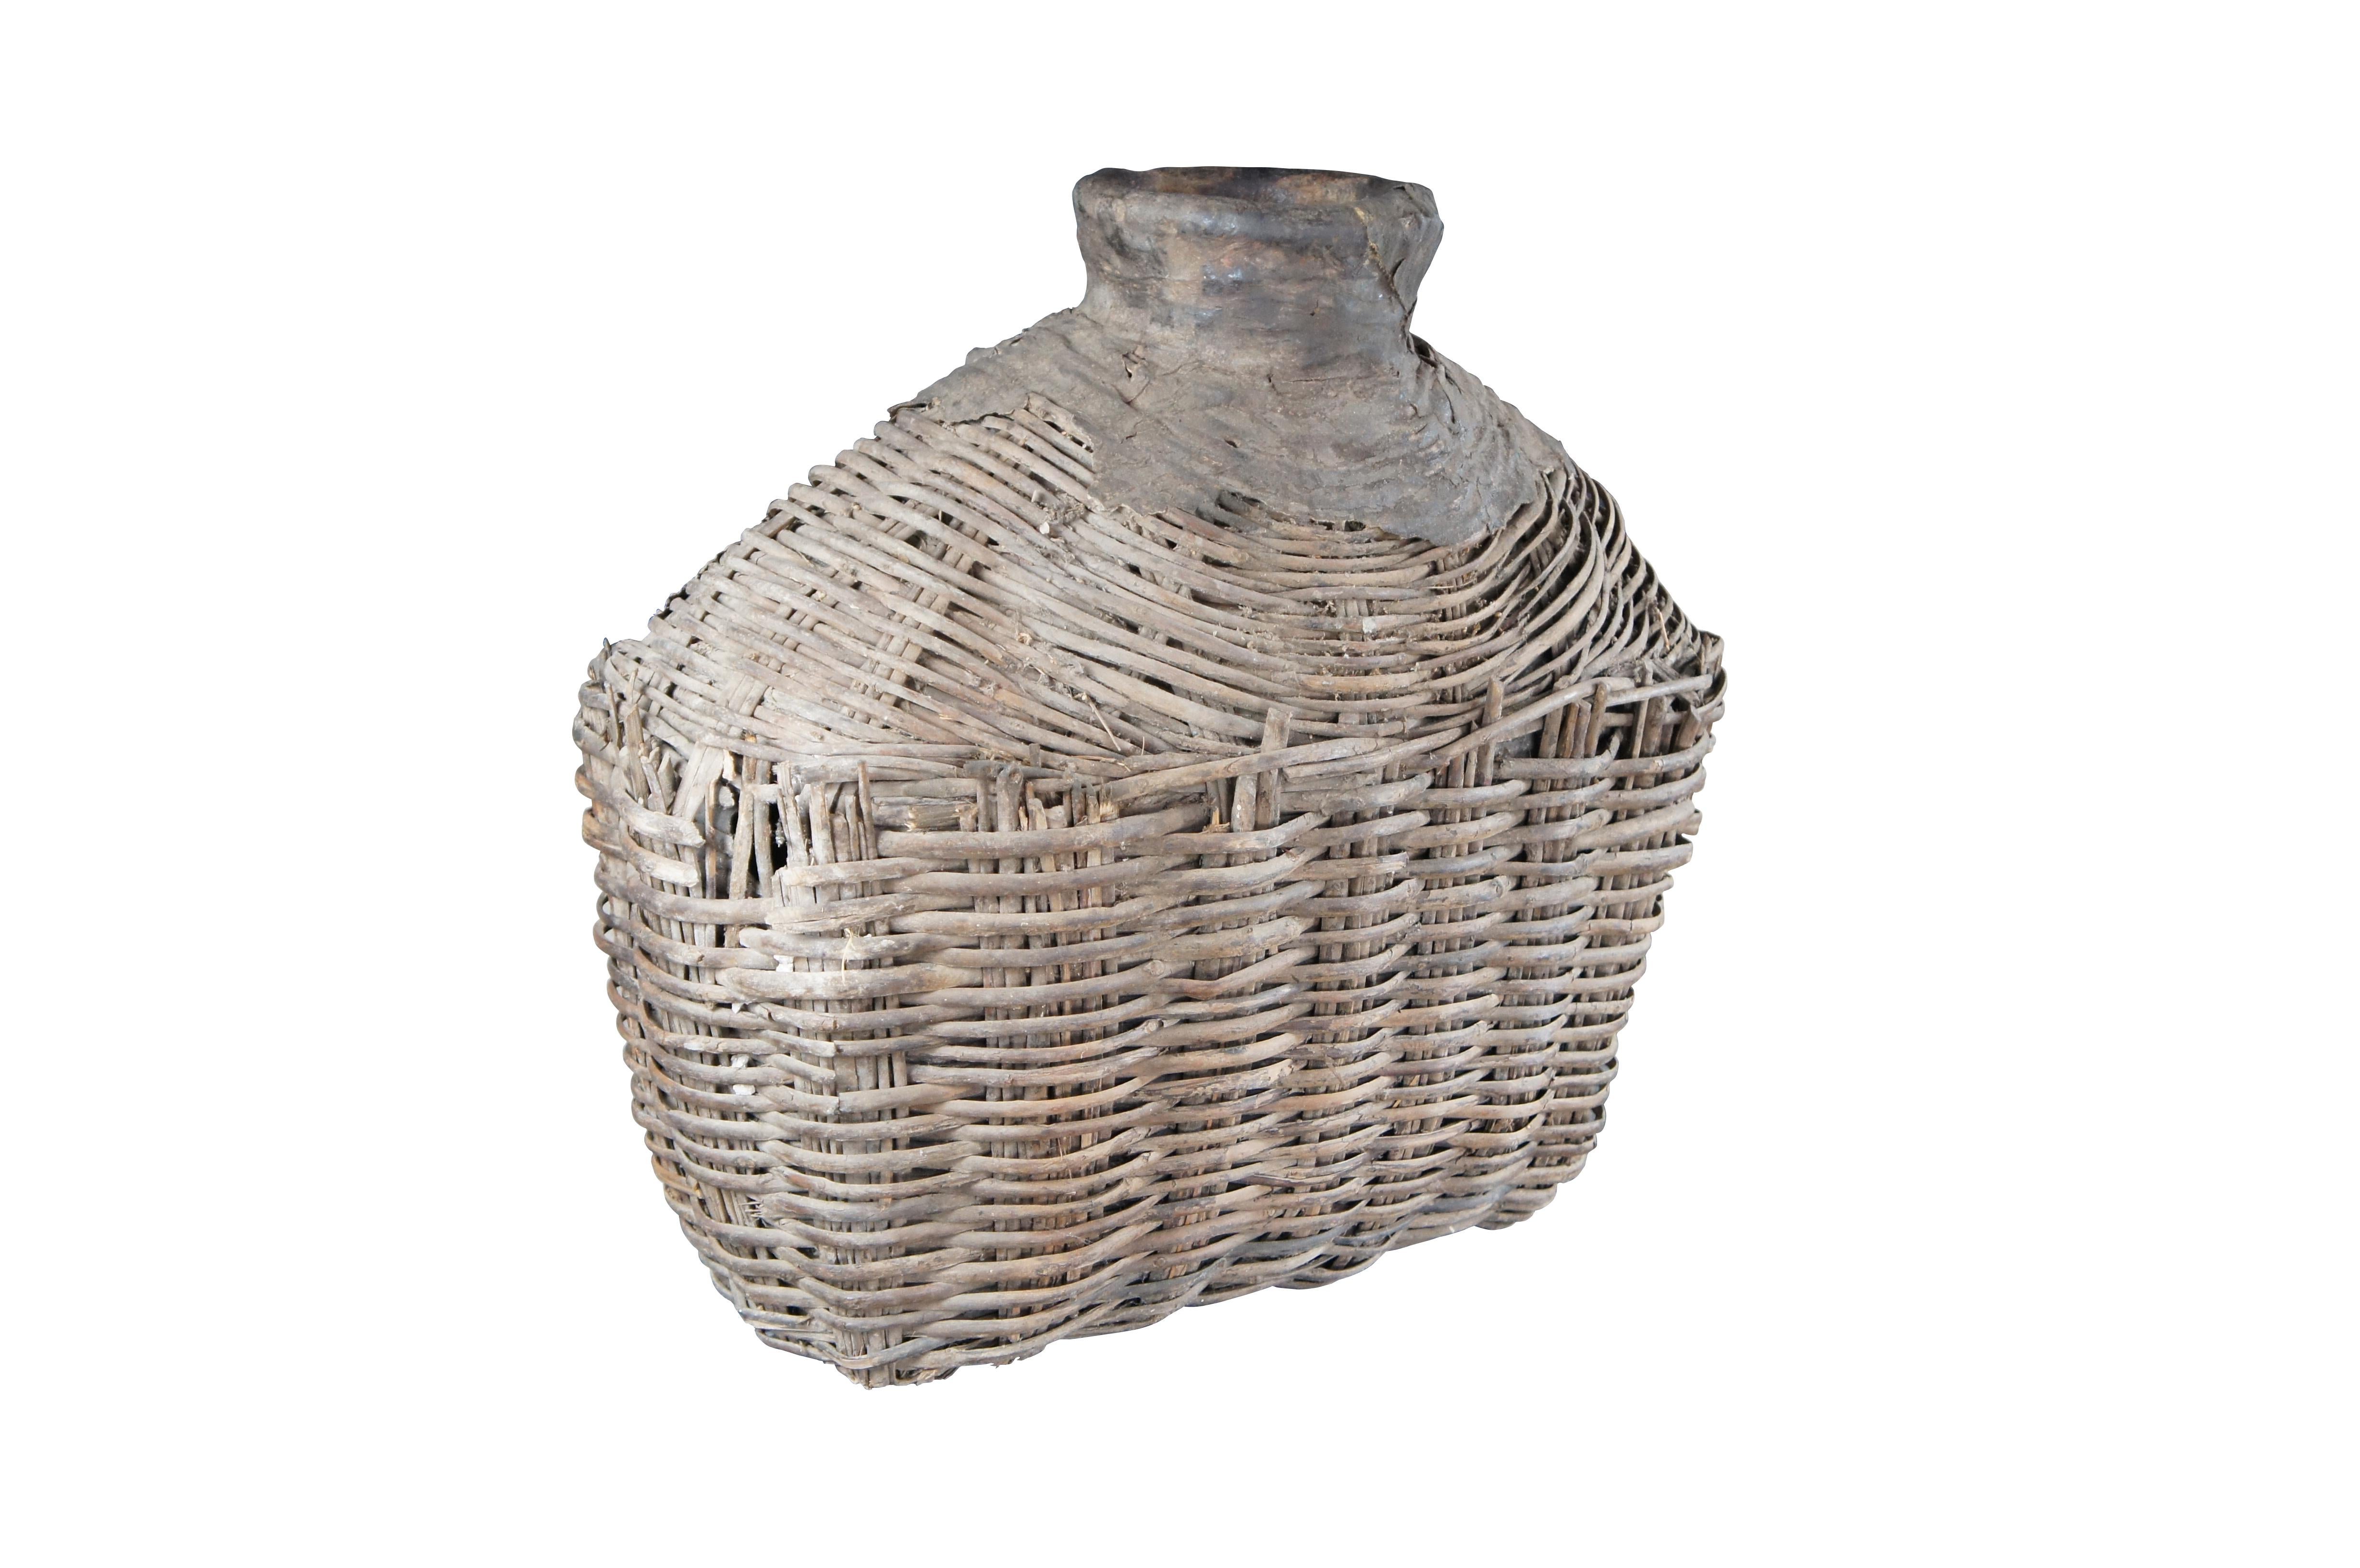 Early 20th Century Chinese Shanxi Willow Oil Container / Food Storage Vessel. Beautifully woven with natural patina from years of use. An unusual yet perfect decorative piece for display in a corner, on a bookcase or in a nook.

Dimensions:
23